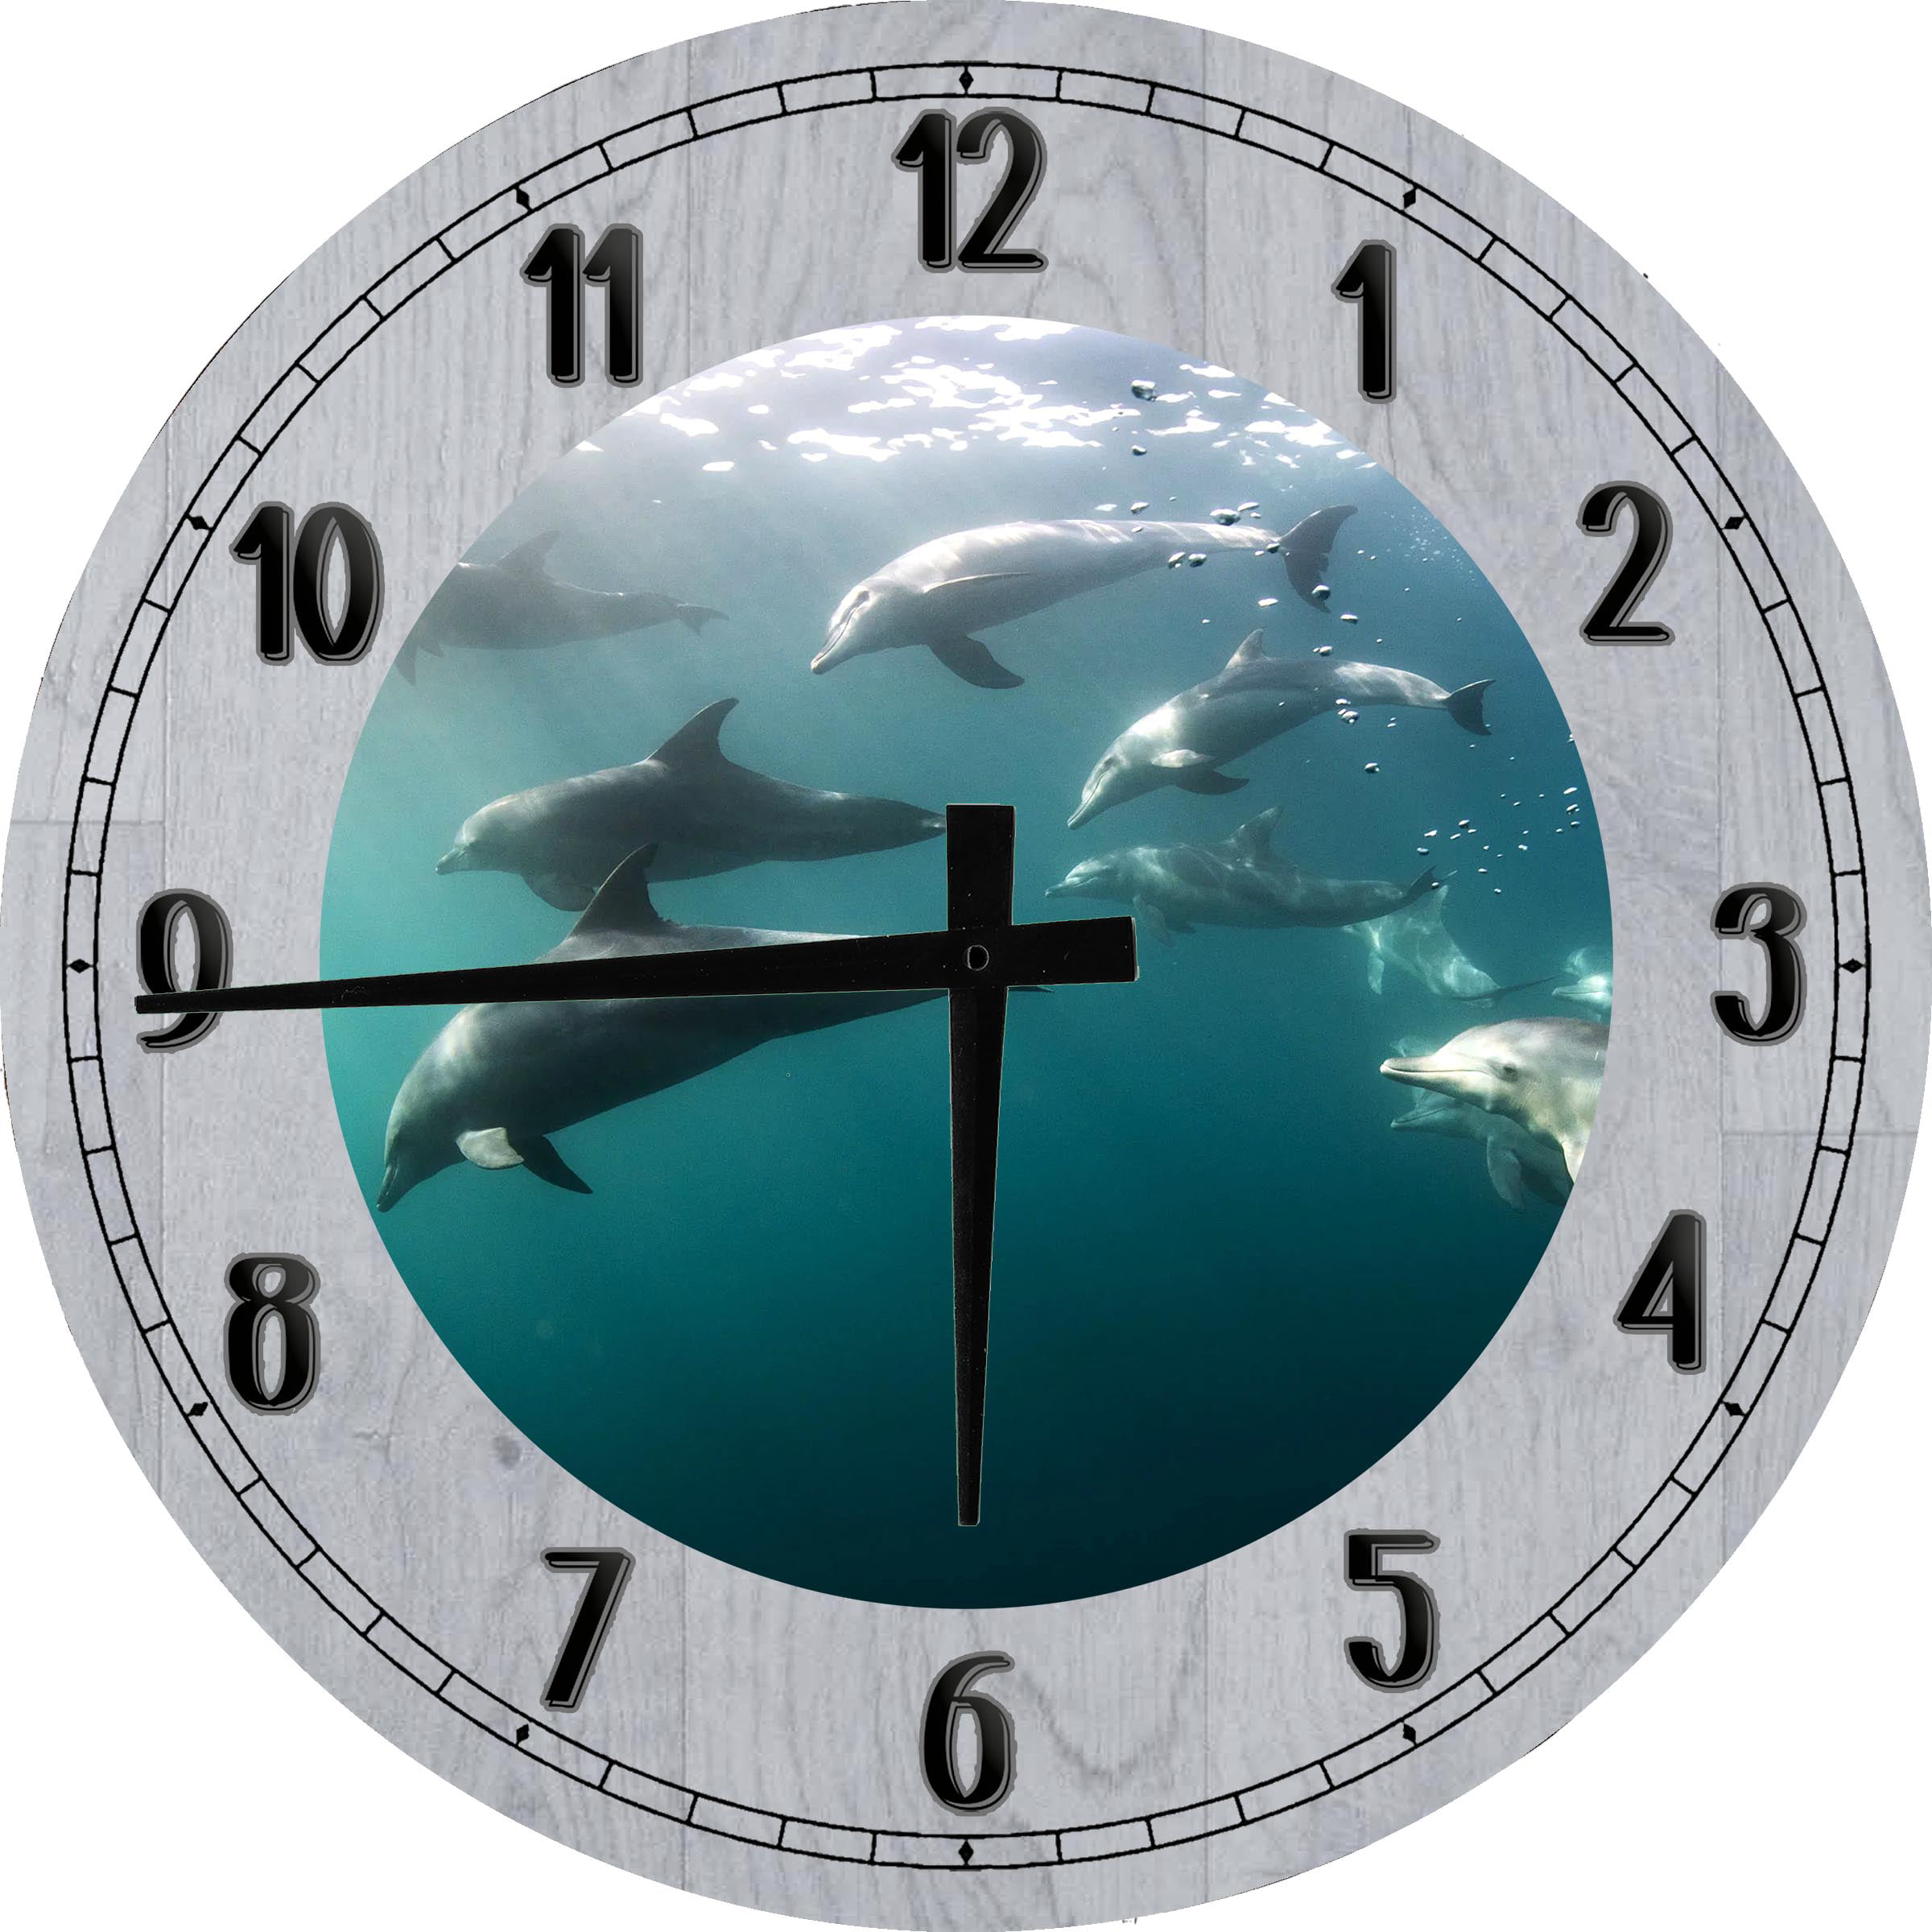 dpp_48980_1 10x10 Wall Clock Dolphin In Atlantis 3dRose Renderly Yours Oceans